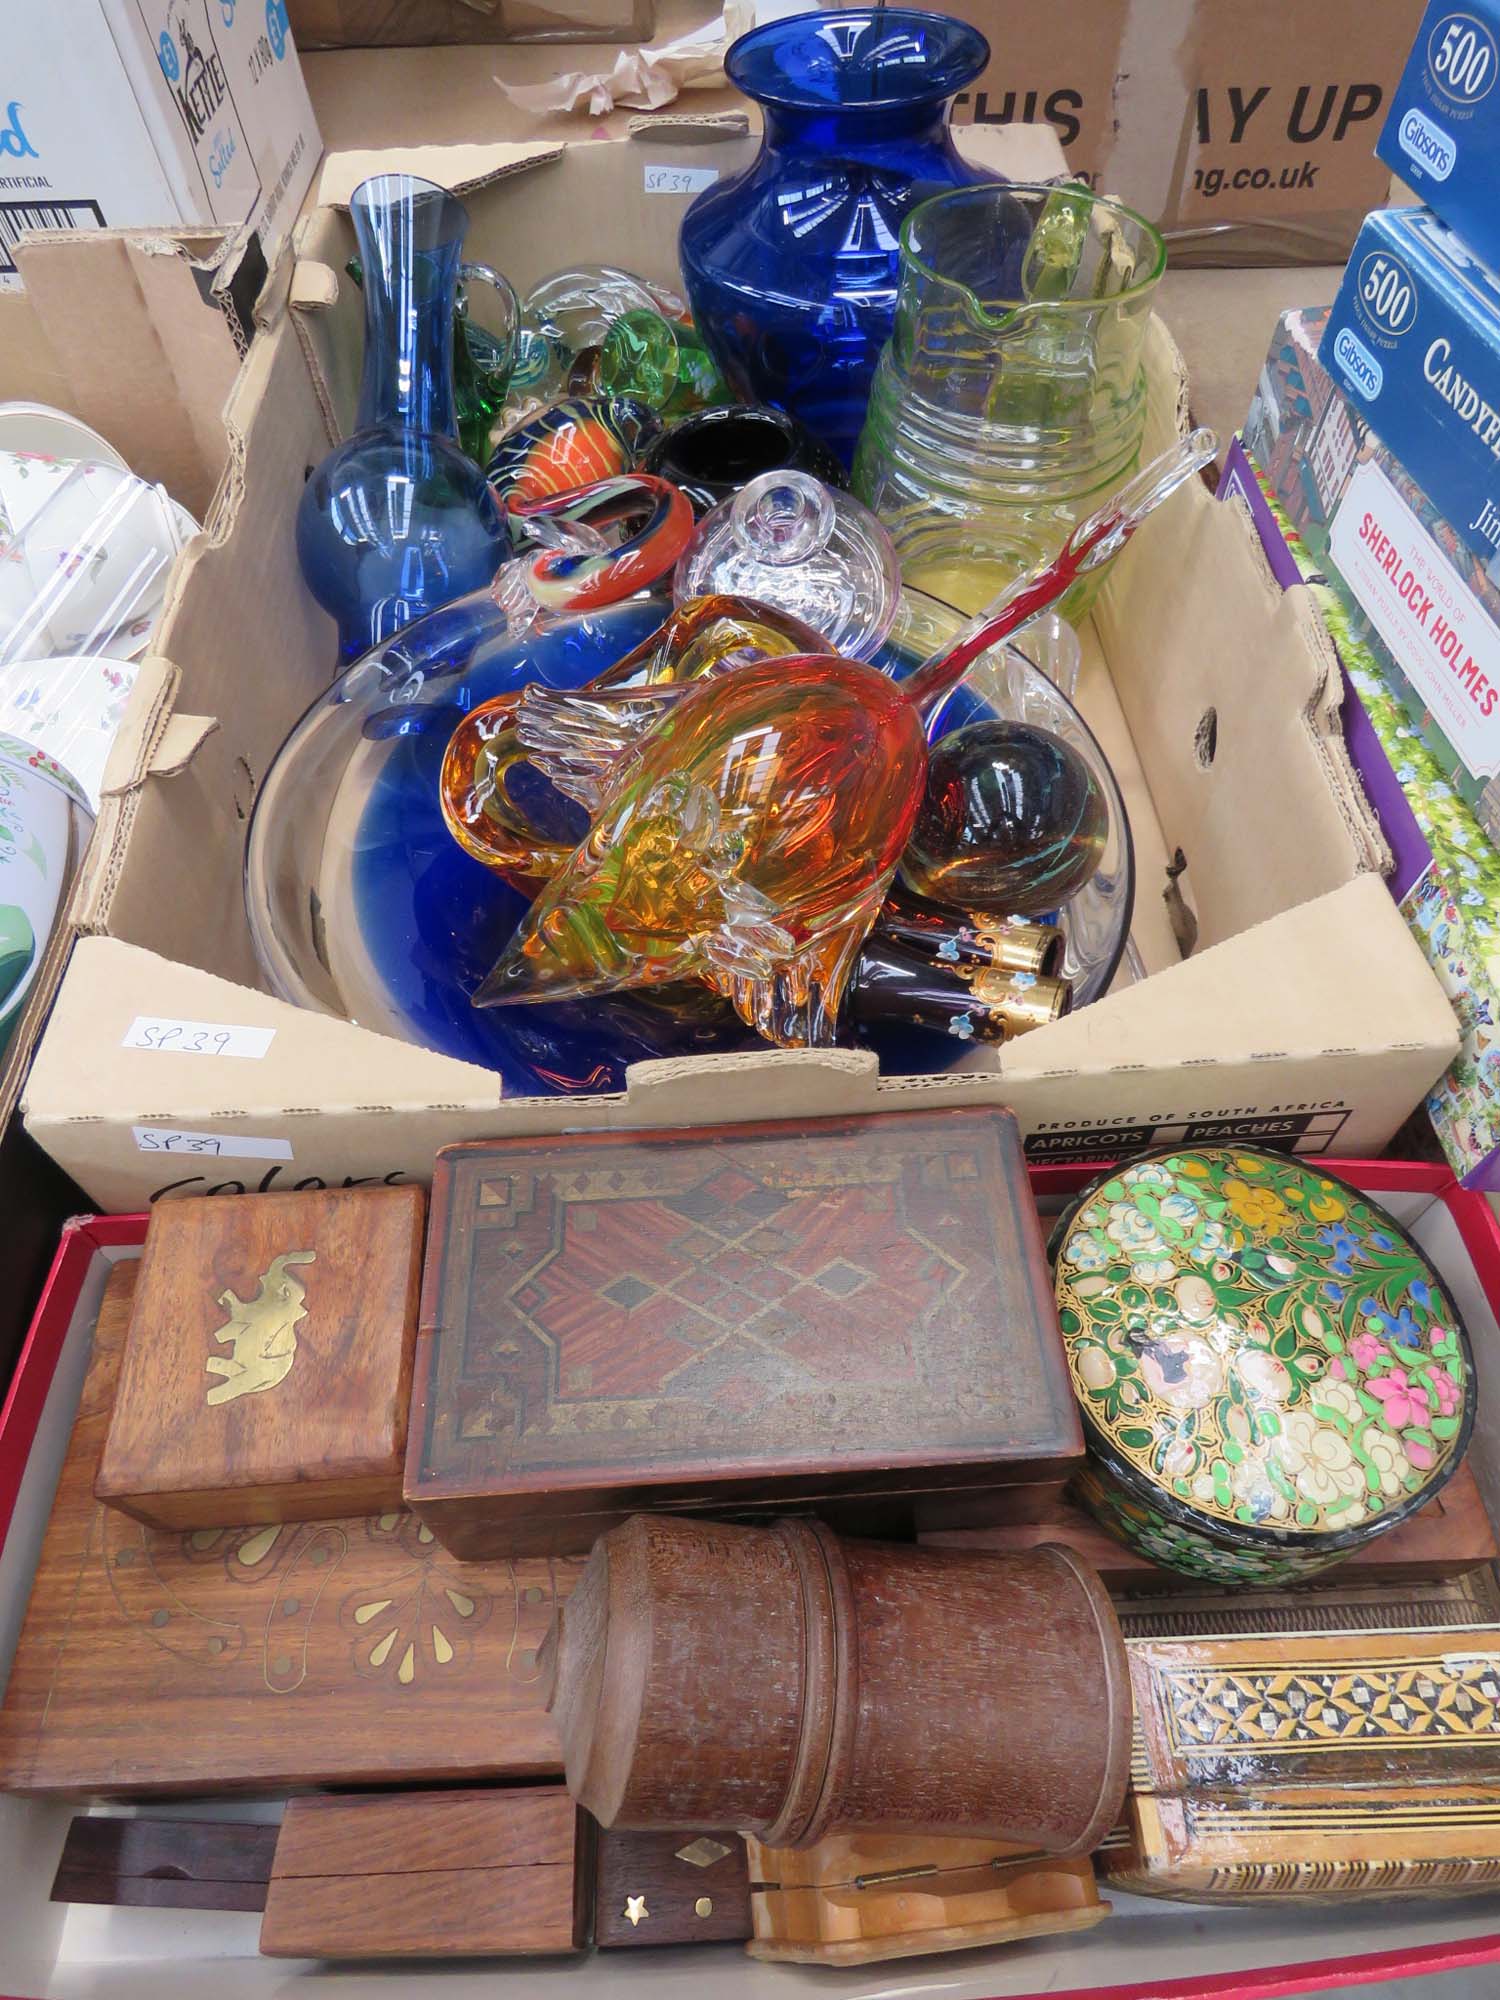 2 boxes containing carnival glass plus dishes, lemonade jug and a quantity of small wooden trinket